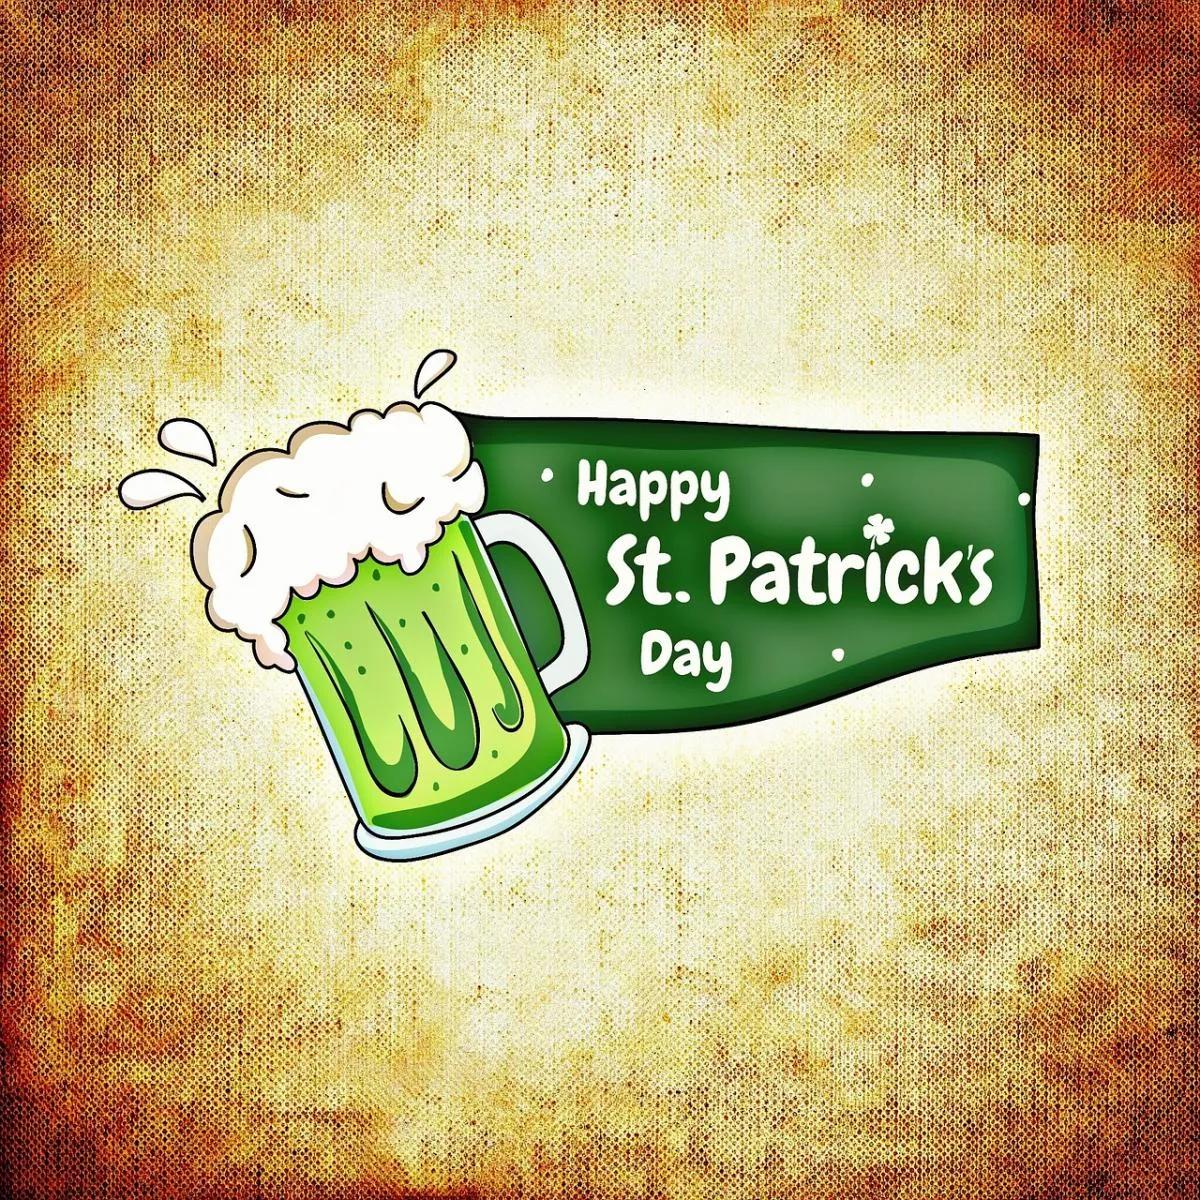 Celebrate St. Patrick&amp;#39;s Day at Jerry&amp;#39;s with Hind Site!, Jacksonville FL ...